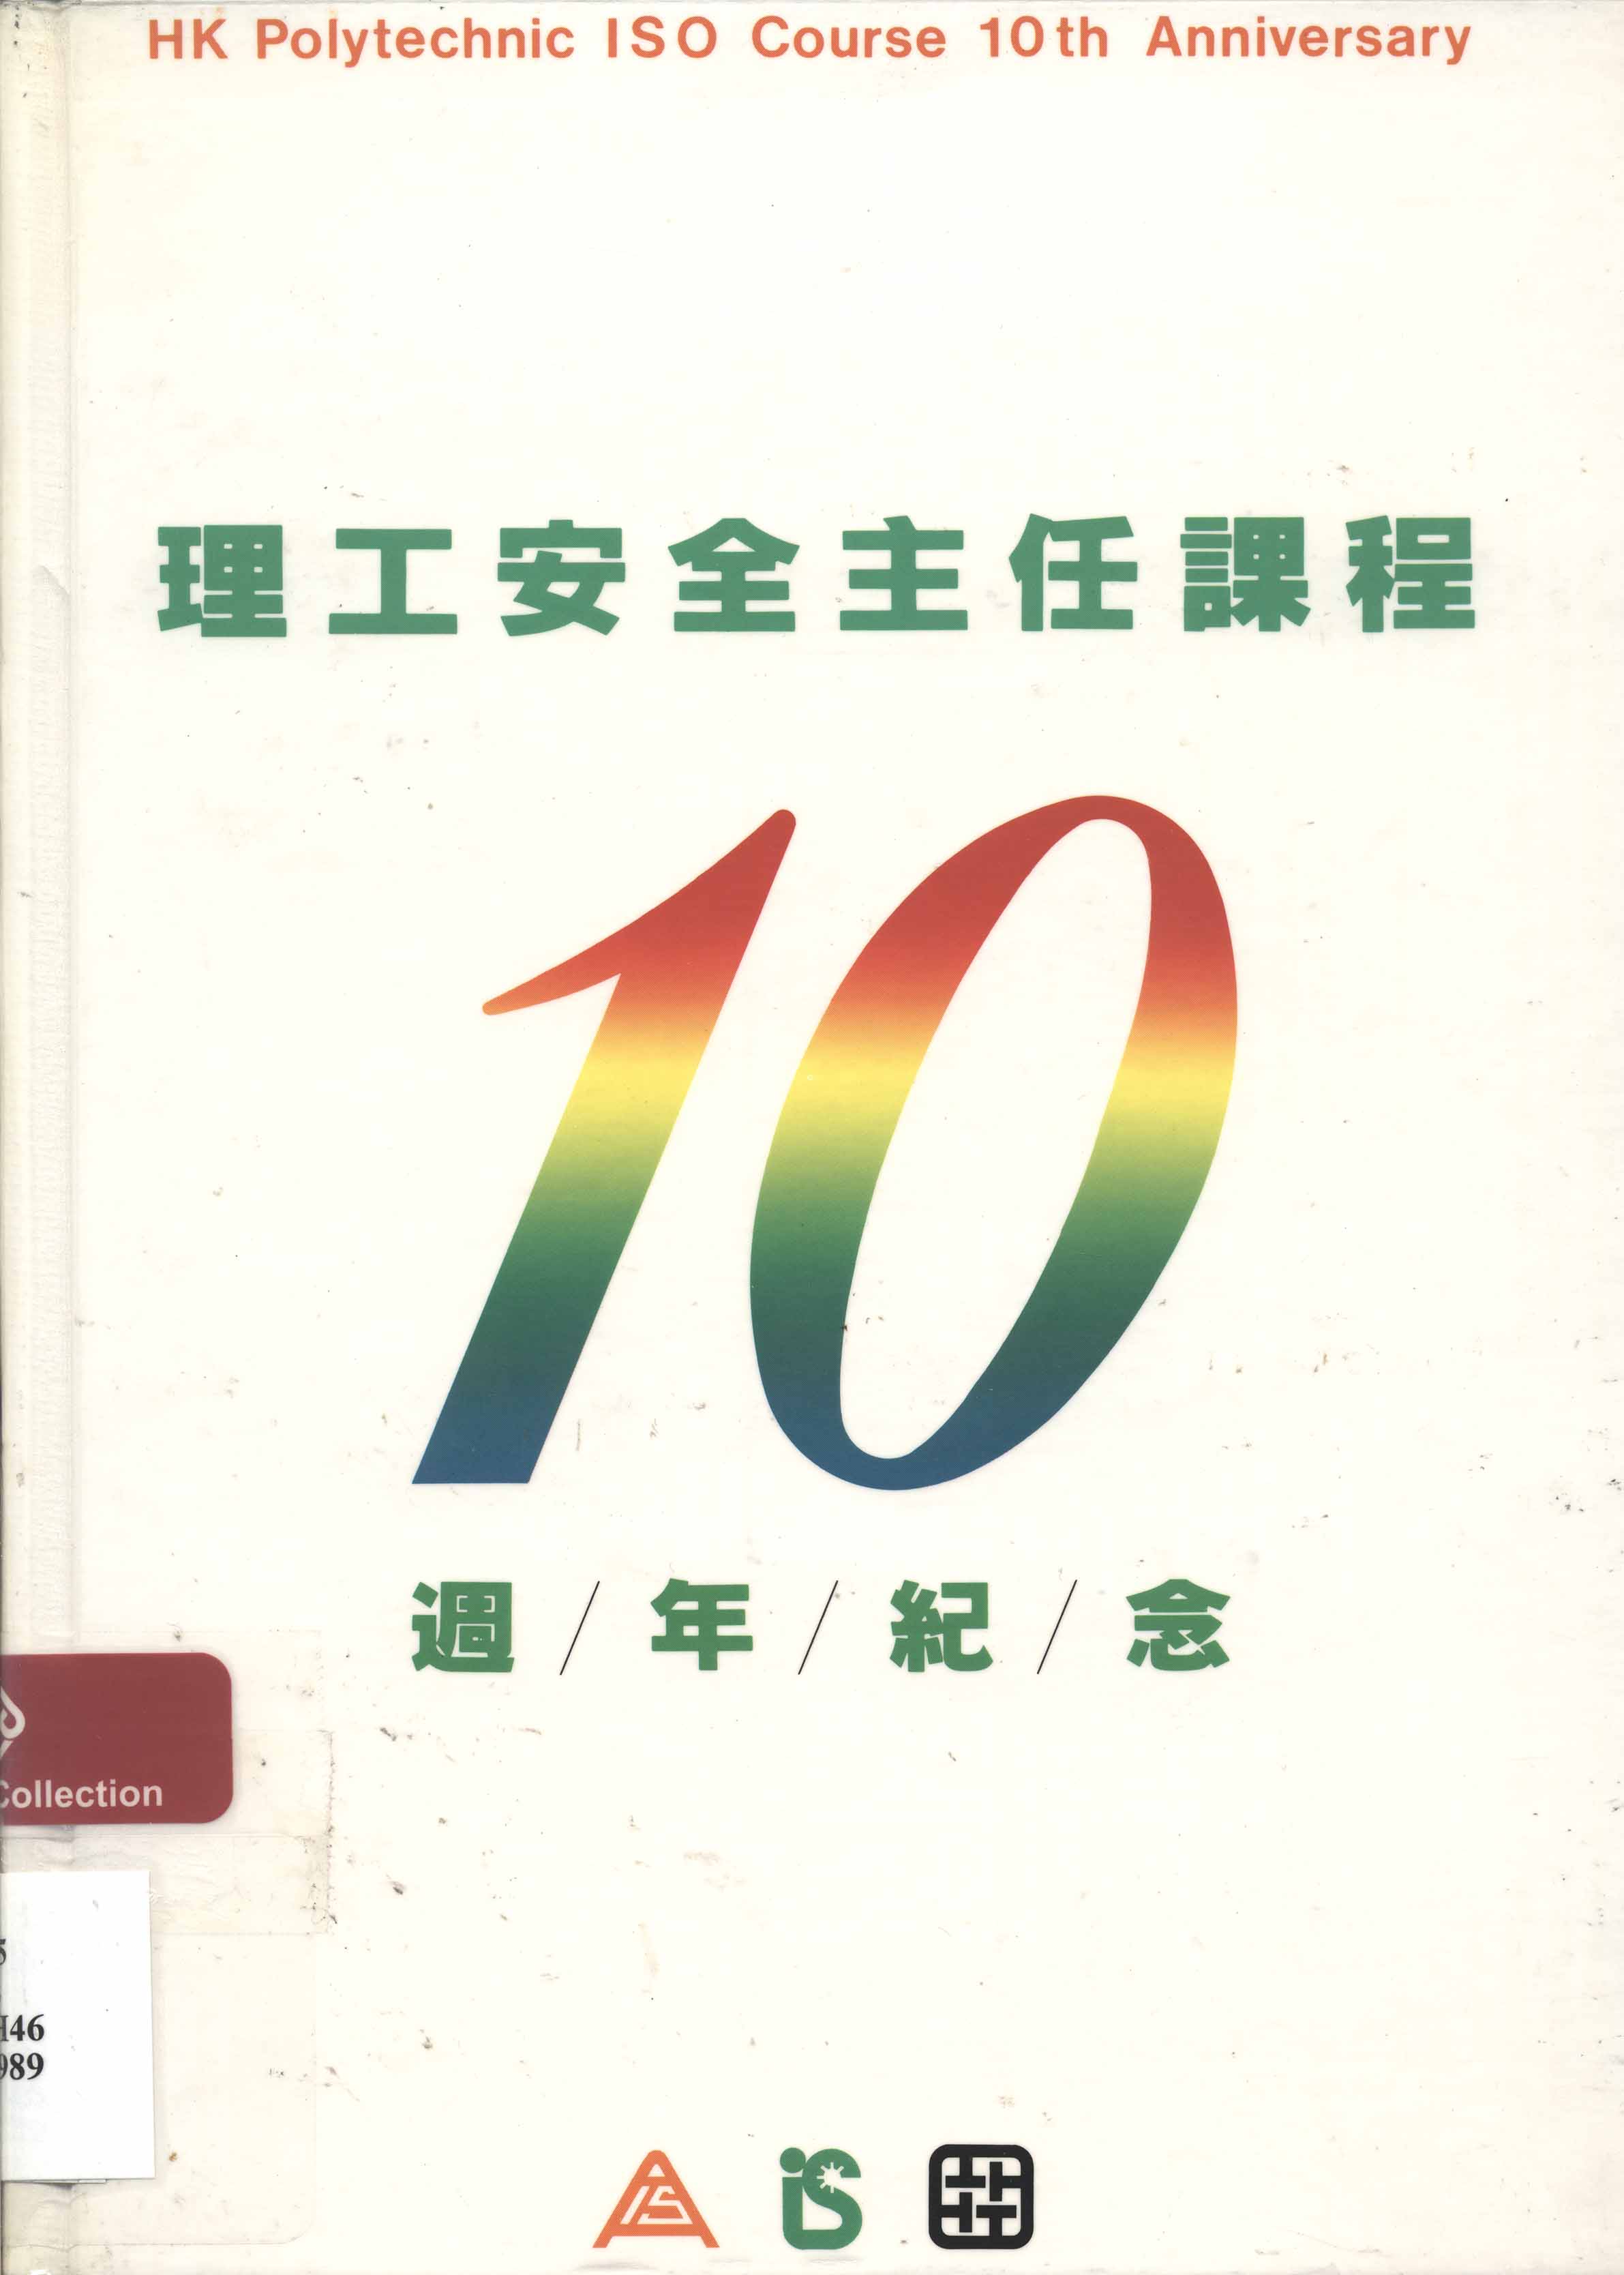 HK Polytechnic ISO course 10th anniversary